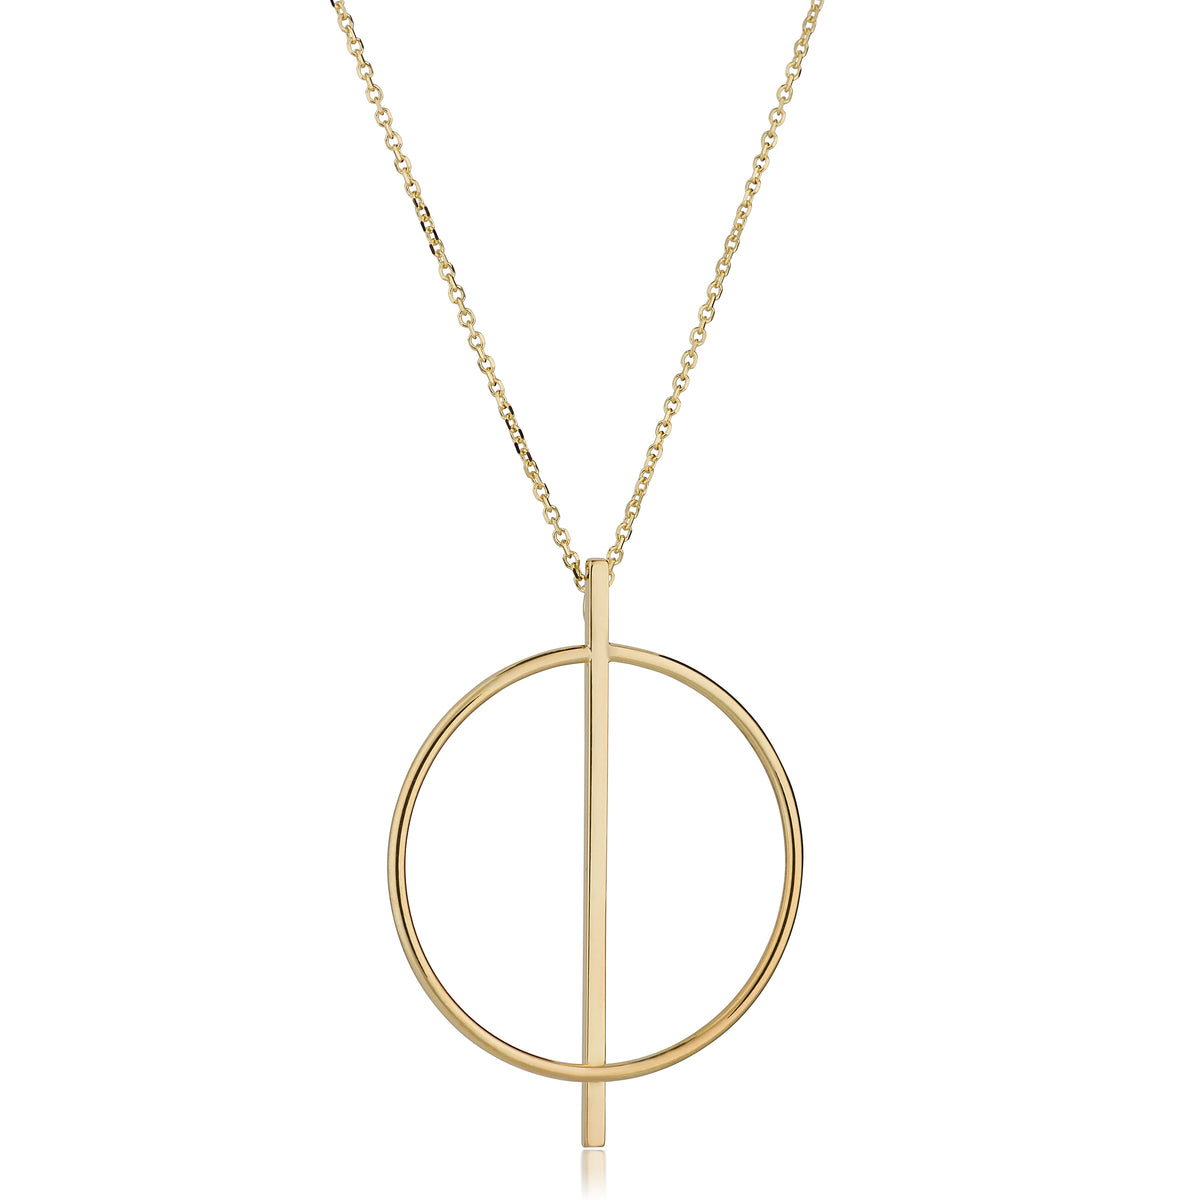 14K Yellow Gold Circle And Bar On 16" To 17" Adjustable Necklace